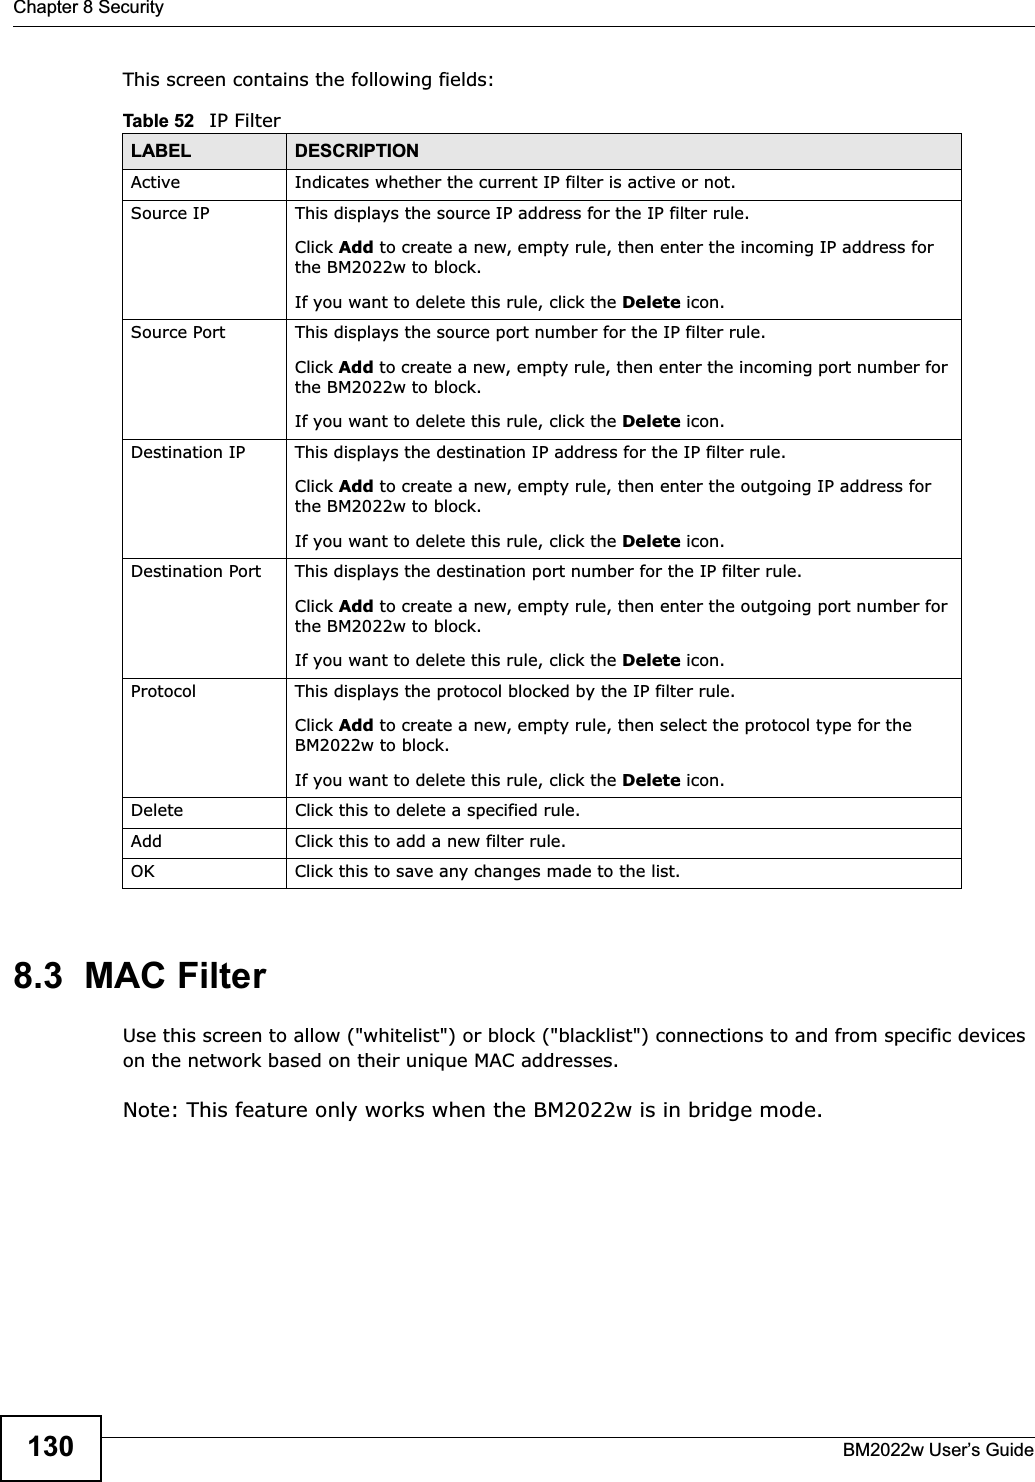 Chapter 8 SecurityBM2022w User’s Guide130This screen contains the following fields:8.3  MAC FilterUse this screen to allow (&quot;whitelist&quot;) or block (&quot;blacklist&quot;) connections to and from specific devices on the network based on their unique MAC addresses.Note: This feature only works when the BM2022w is in bridge mode.Table 52   IP FilterLABEL DESCRIPTIONActive Indicates whether the current IP filter is active or not.Source IP This displays the source IP address for the IP filter rule.Click Add to create a new, empty rule, then enter the incoming IP address for the BM2022w to block.If you want to delete this rule, click the Delete icon.Source Port This displays the source port number for the IP filter rule.Click Add to create a new, empty rule, then enter the incoming port number for the BM2022w to block.If you want to delete this rule, click the Delete icon.Destination IP This displays the destination IP address for the IP filter rule.Click Add to create a new, empty rule, then enter the outgoing IP address for the BM2022w to block.If you want to delete this rule, click the Delete icon.Destination Port This displays the destination port number for the IP filter rule.Click Add to create a new, empty rule, then enter the outgoing port number for the BM2022w to block.If you want to delete this rule, click the Delete icon.Protocol This displays the protocol blocked by the IP filter rule.Click Add to create a new, empty rule, then select the protocol type for the BM2022w to block.If you want to delete this rule, click the Delete icon.Delete Click this to delete a specified rule.Add Click this to add a new filter rule.OK Click this to save any changes made to the list.